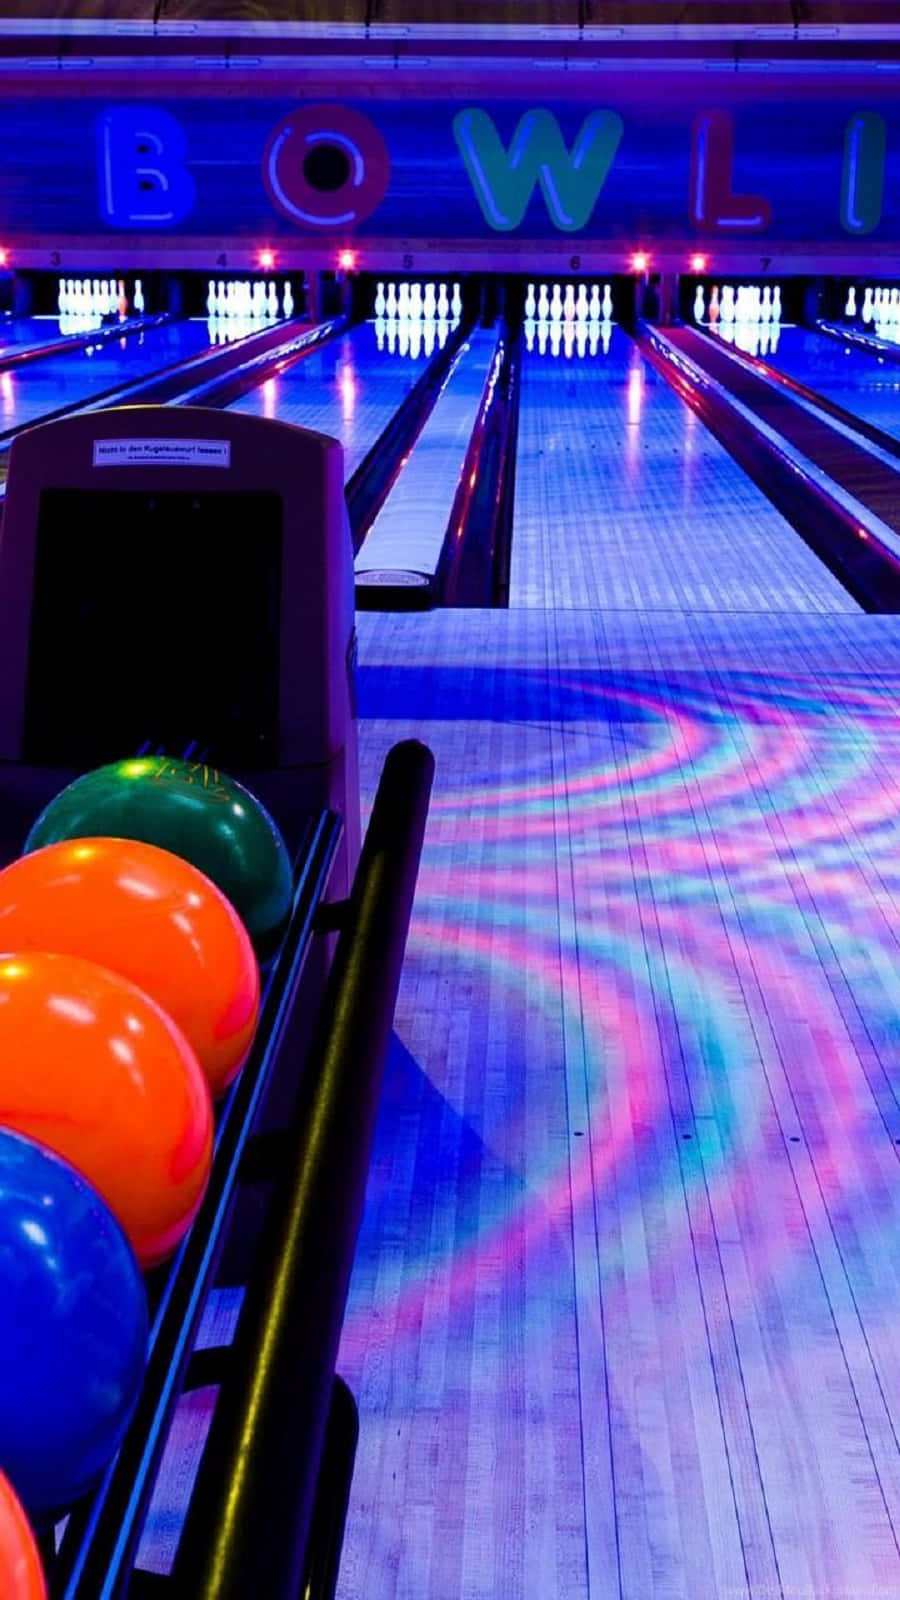 Strike the pins for a perfect game of bowling!